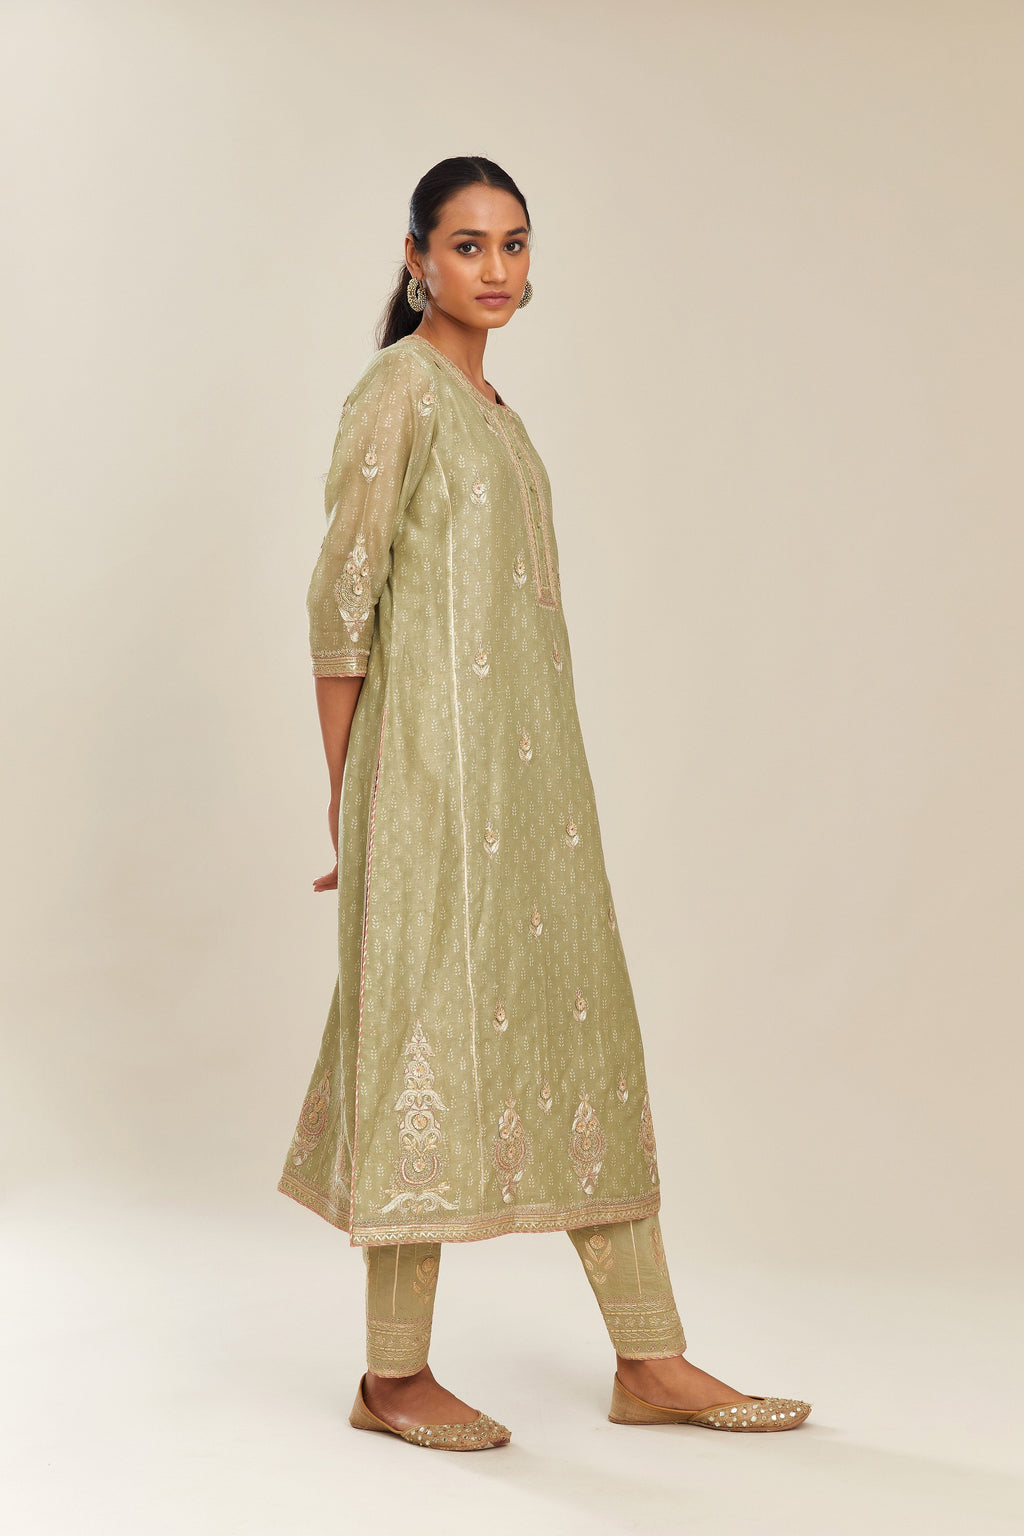 Sage green hand block printed silk chanderi kurta set with side panels, highlighted with gold gota and zari embroidery.